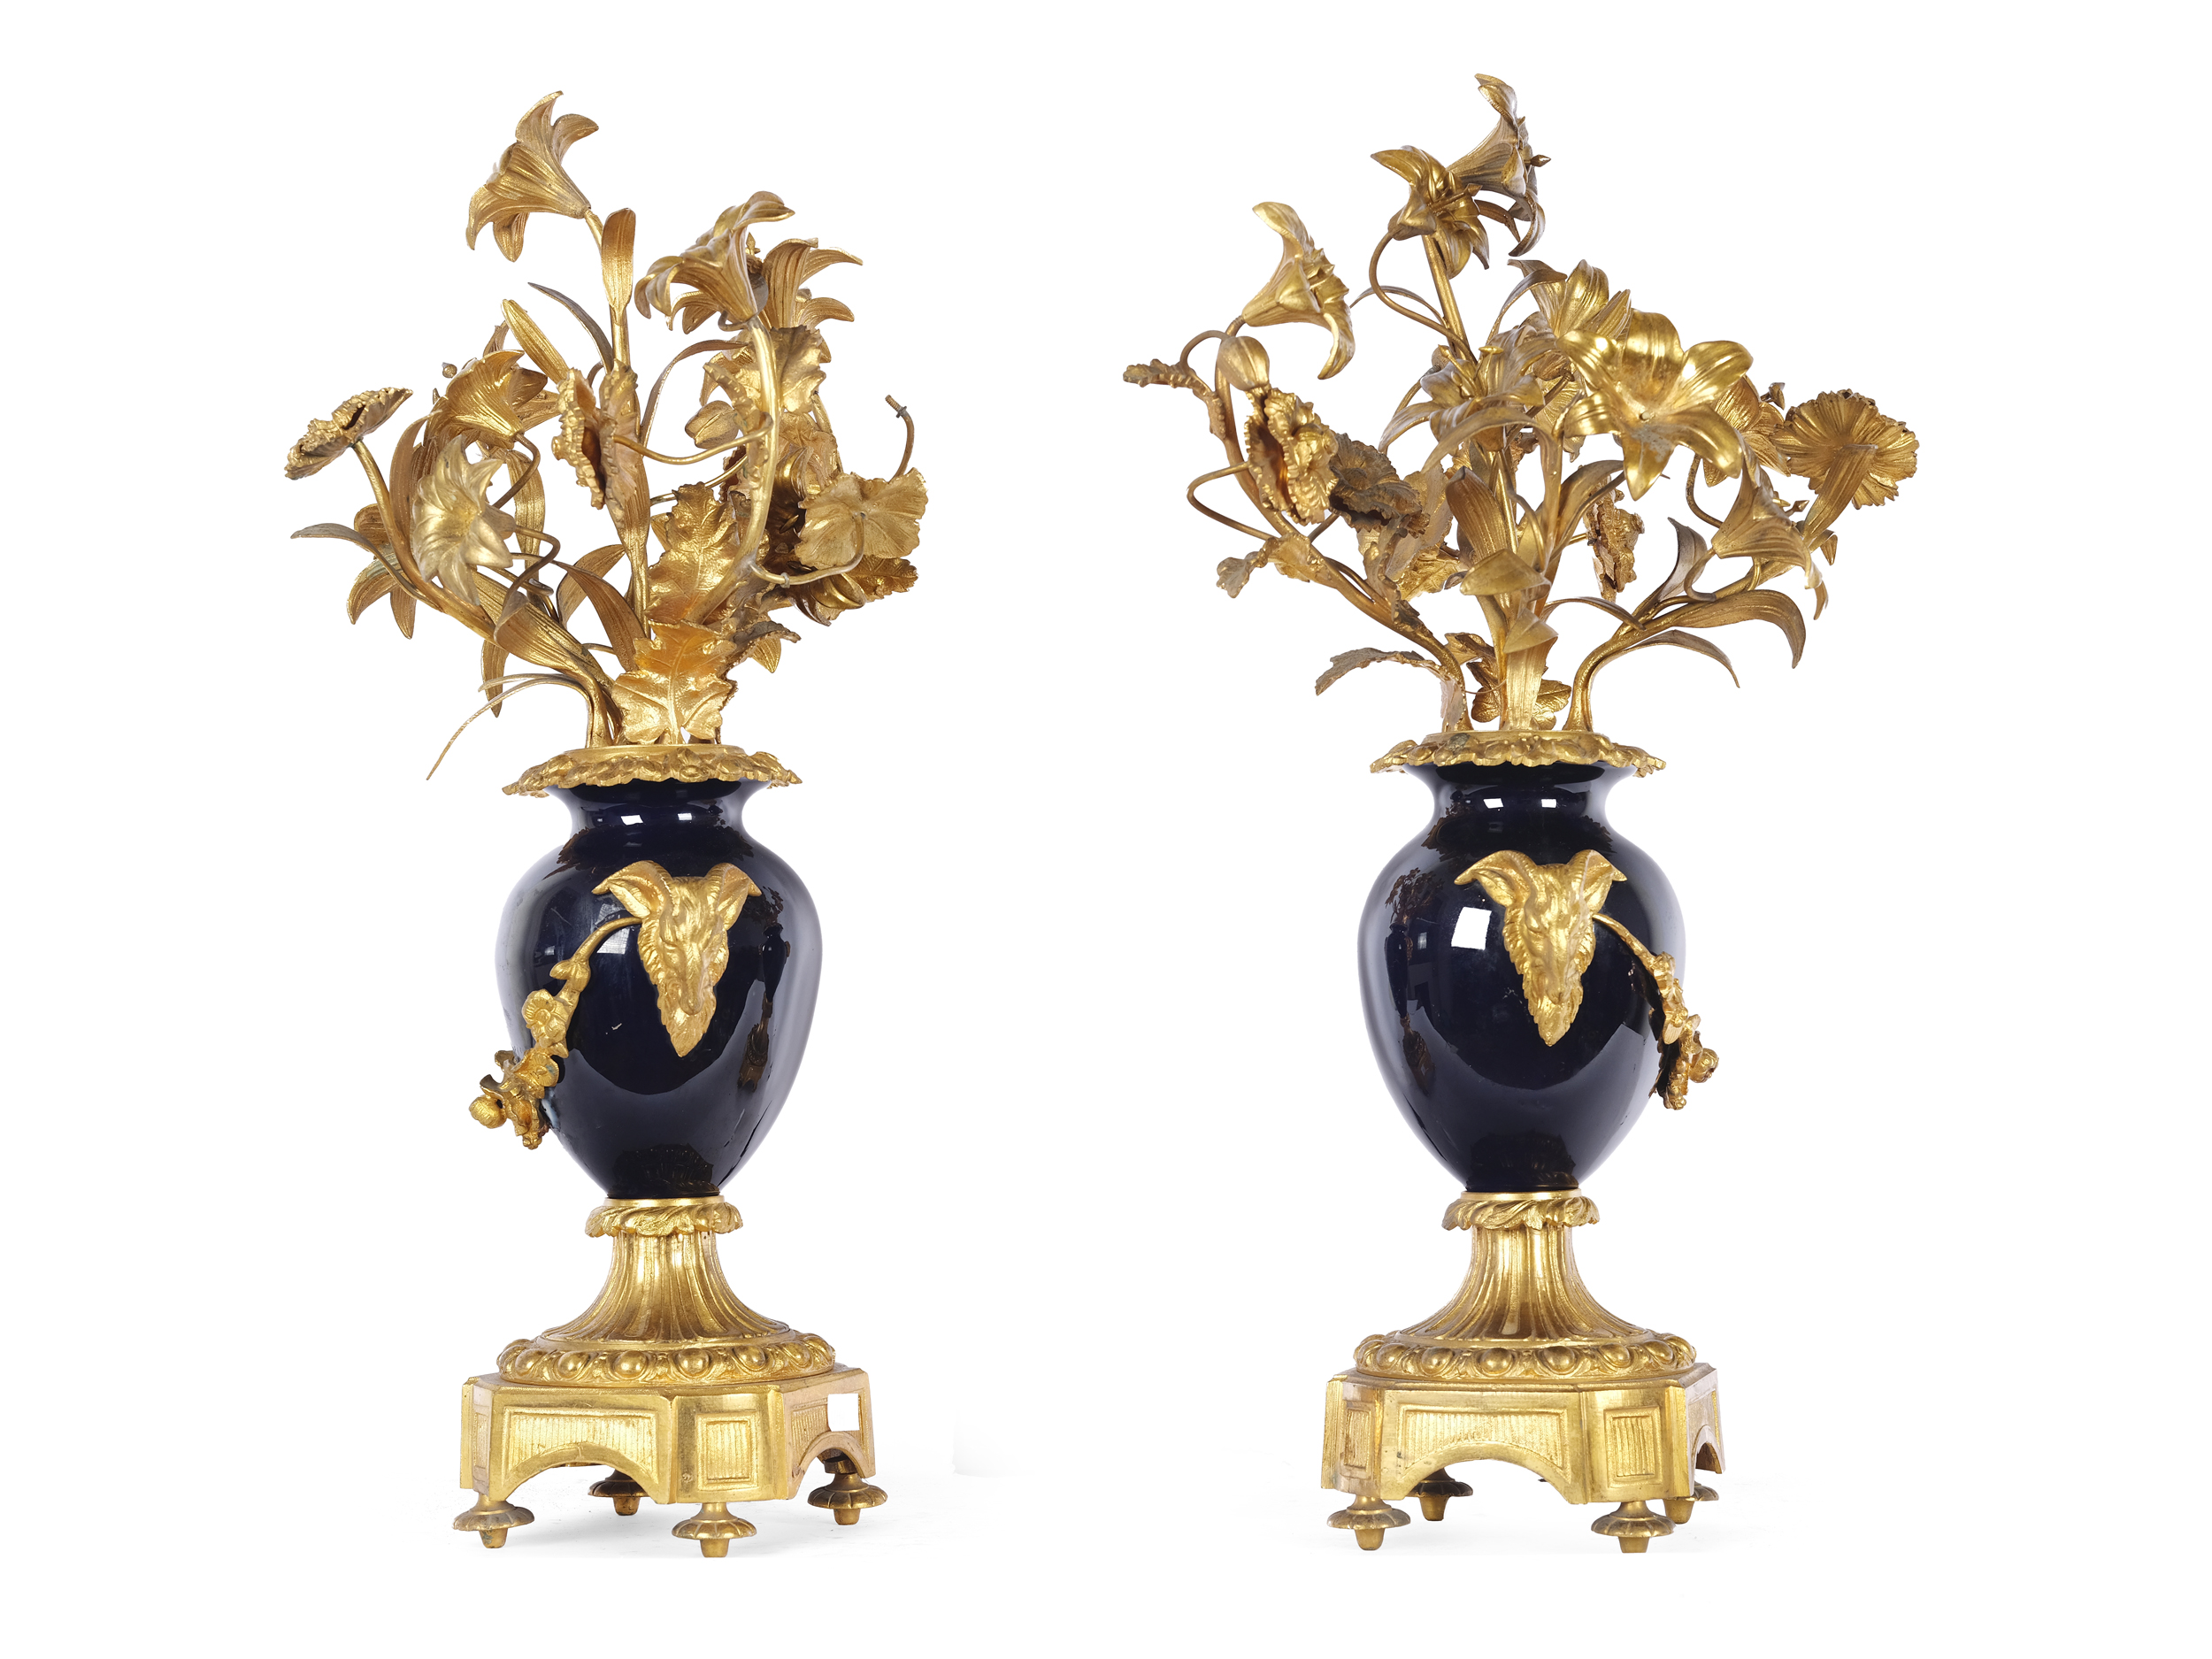 Pair of magnificent vases, France, 2nd half of the 19th century - Image 2 of 3